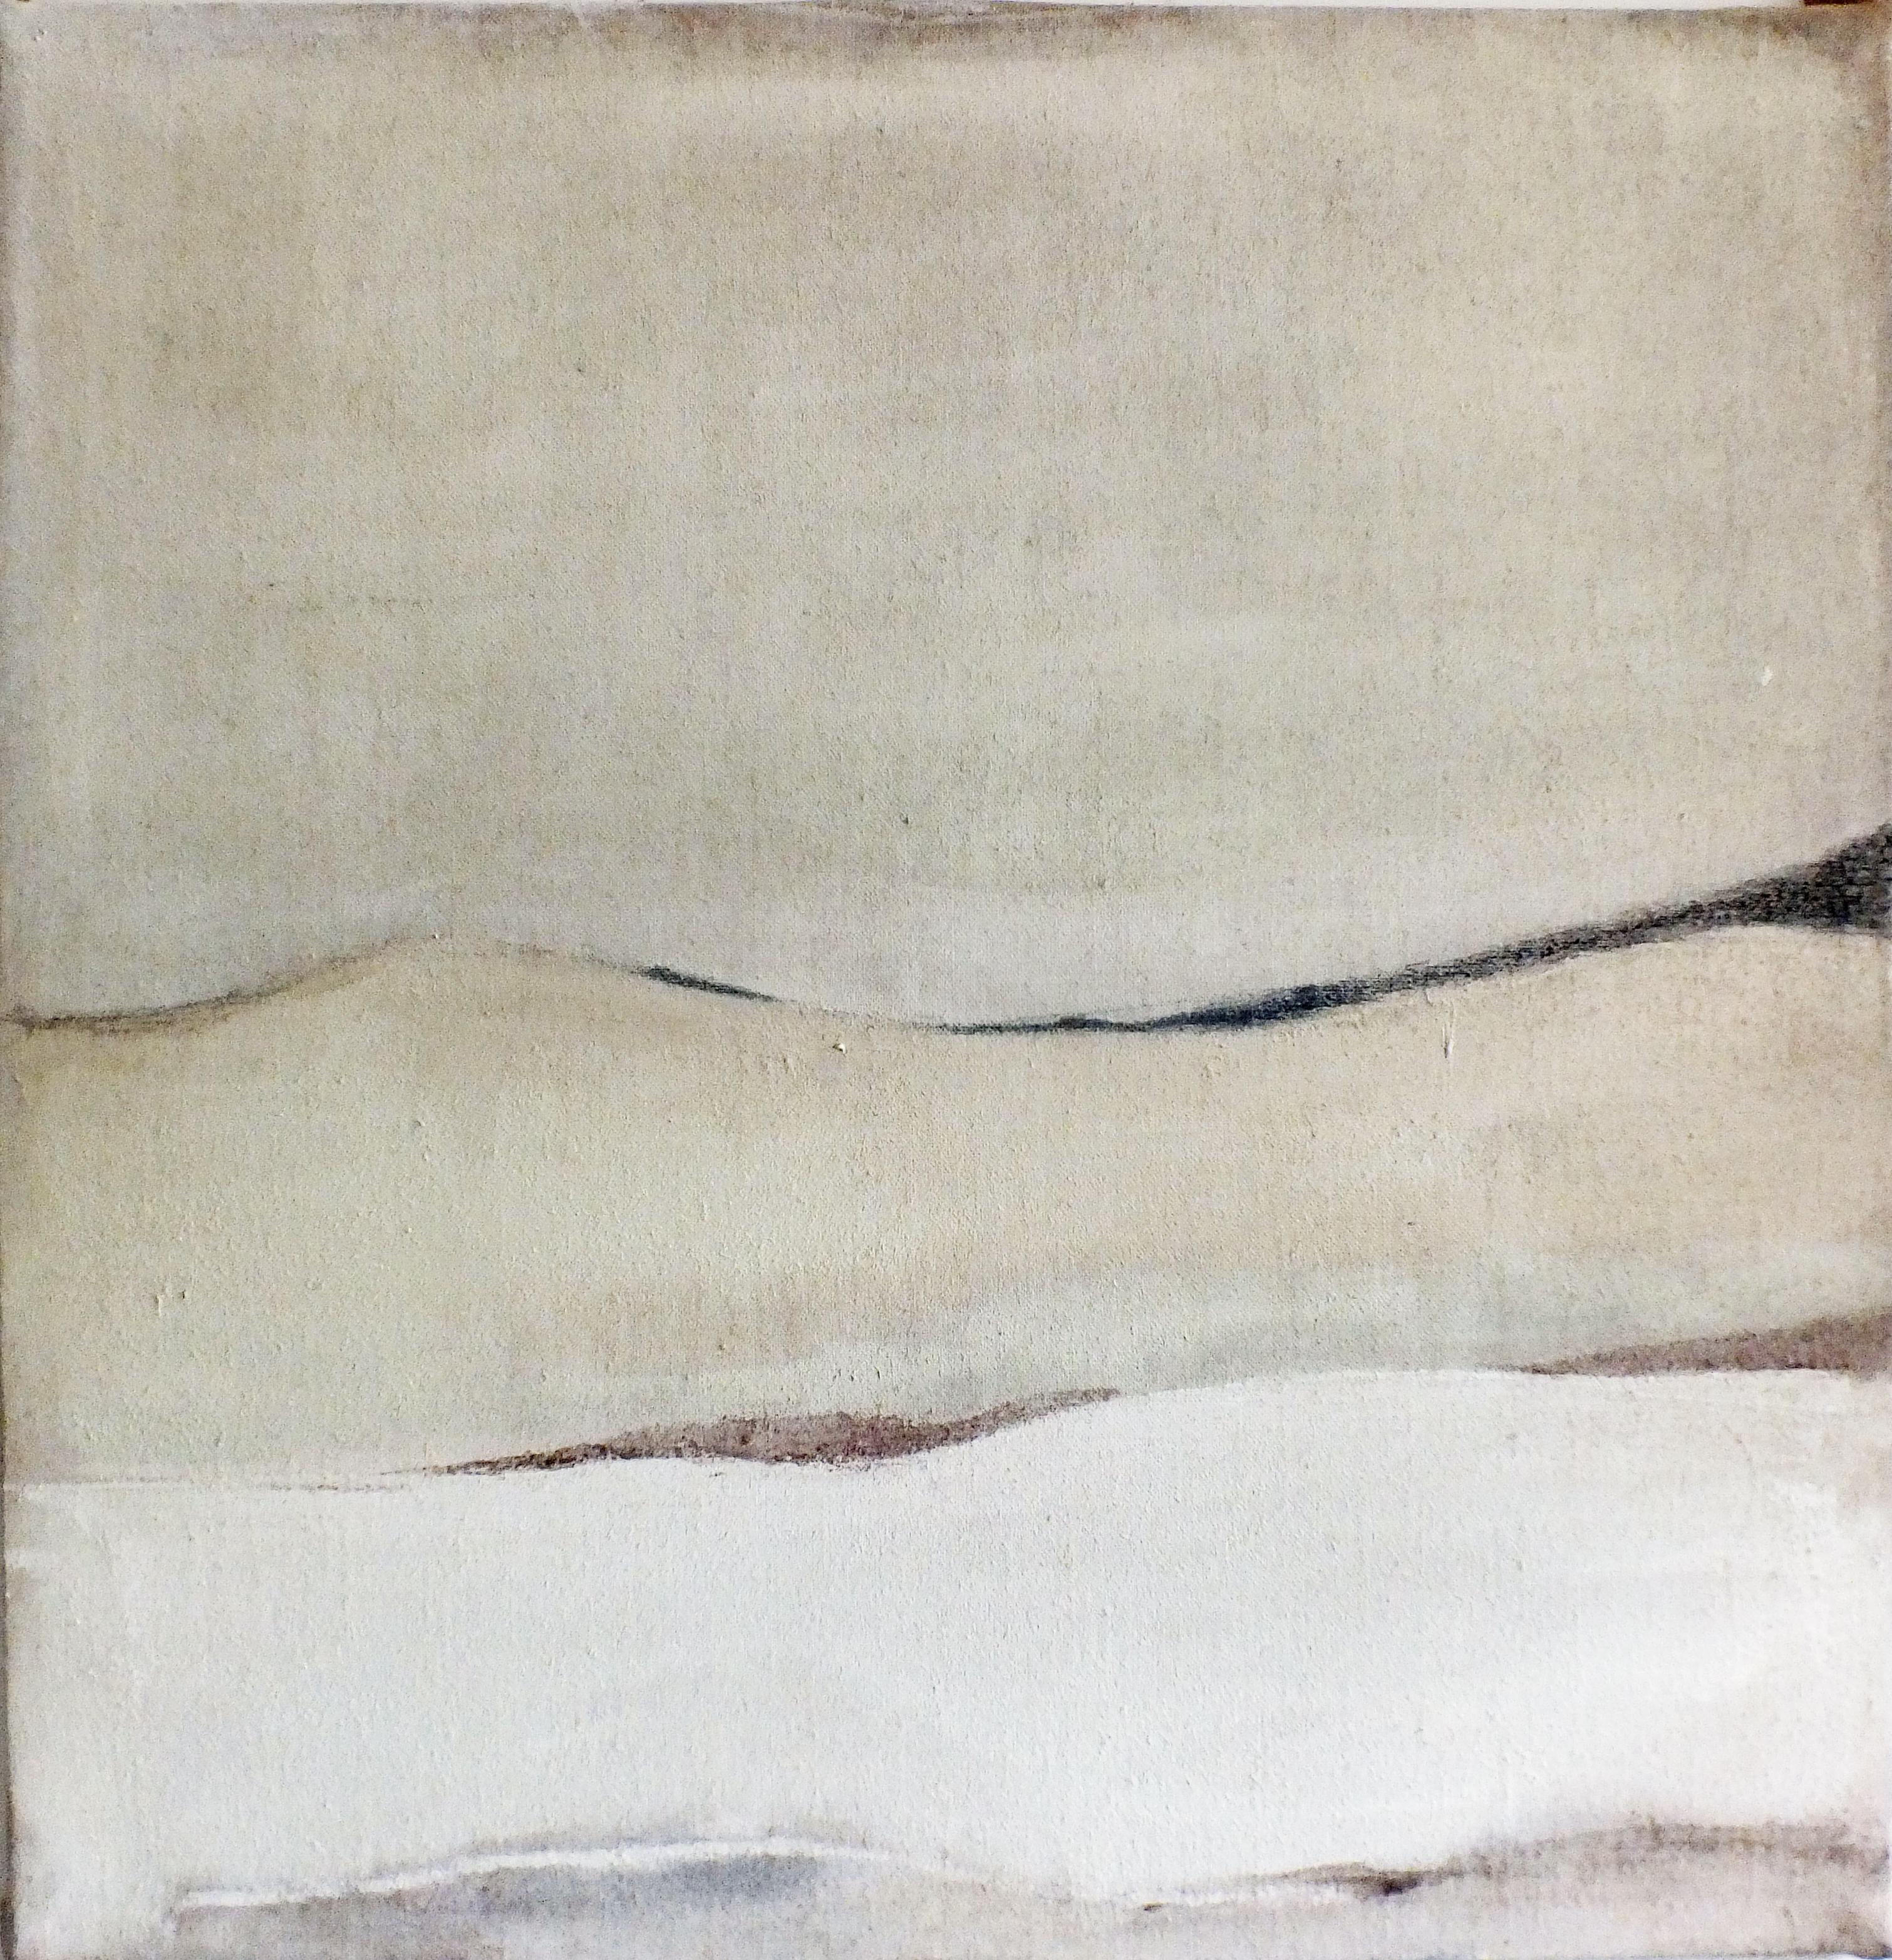 'Landscape 64' by Marilina Marchica  - a beautiful contemporary abstract mixed media of Italian nature. Minimalist cityscapes, nature, and charm of decaying buildings remain a major focus of the artist's creative process. Smooth earthy tones and